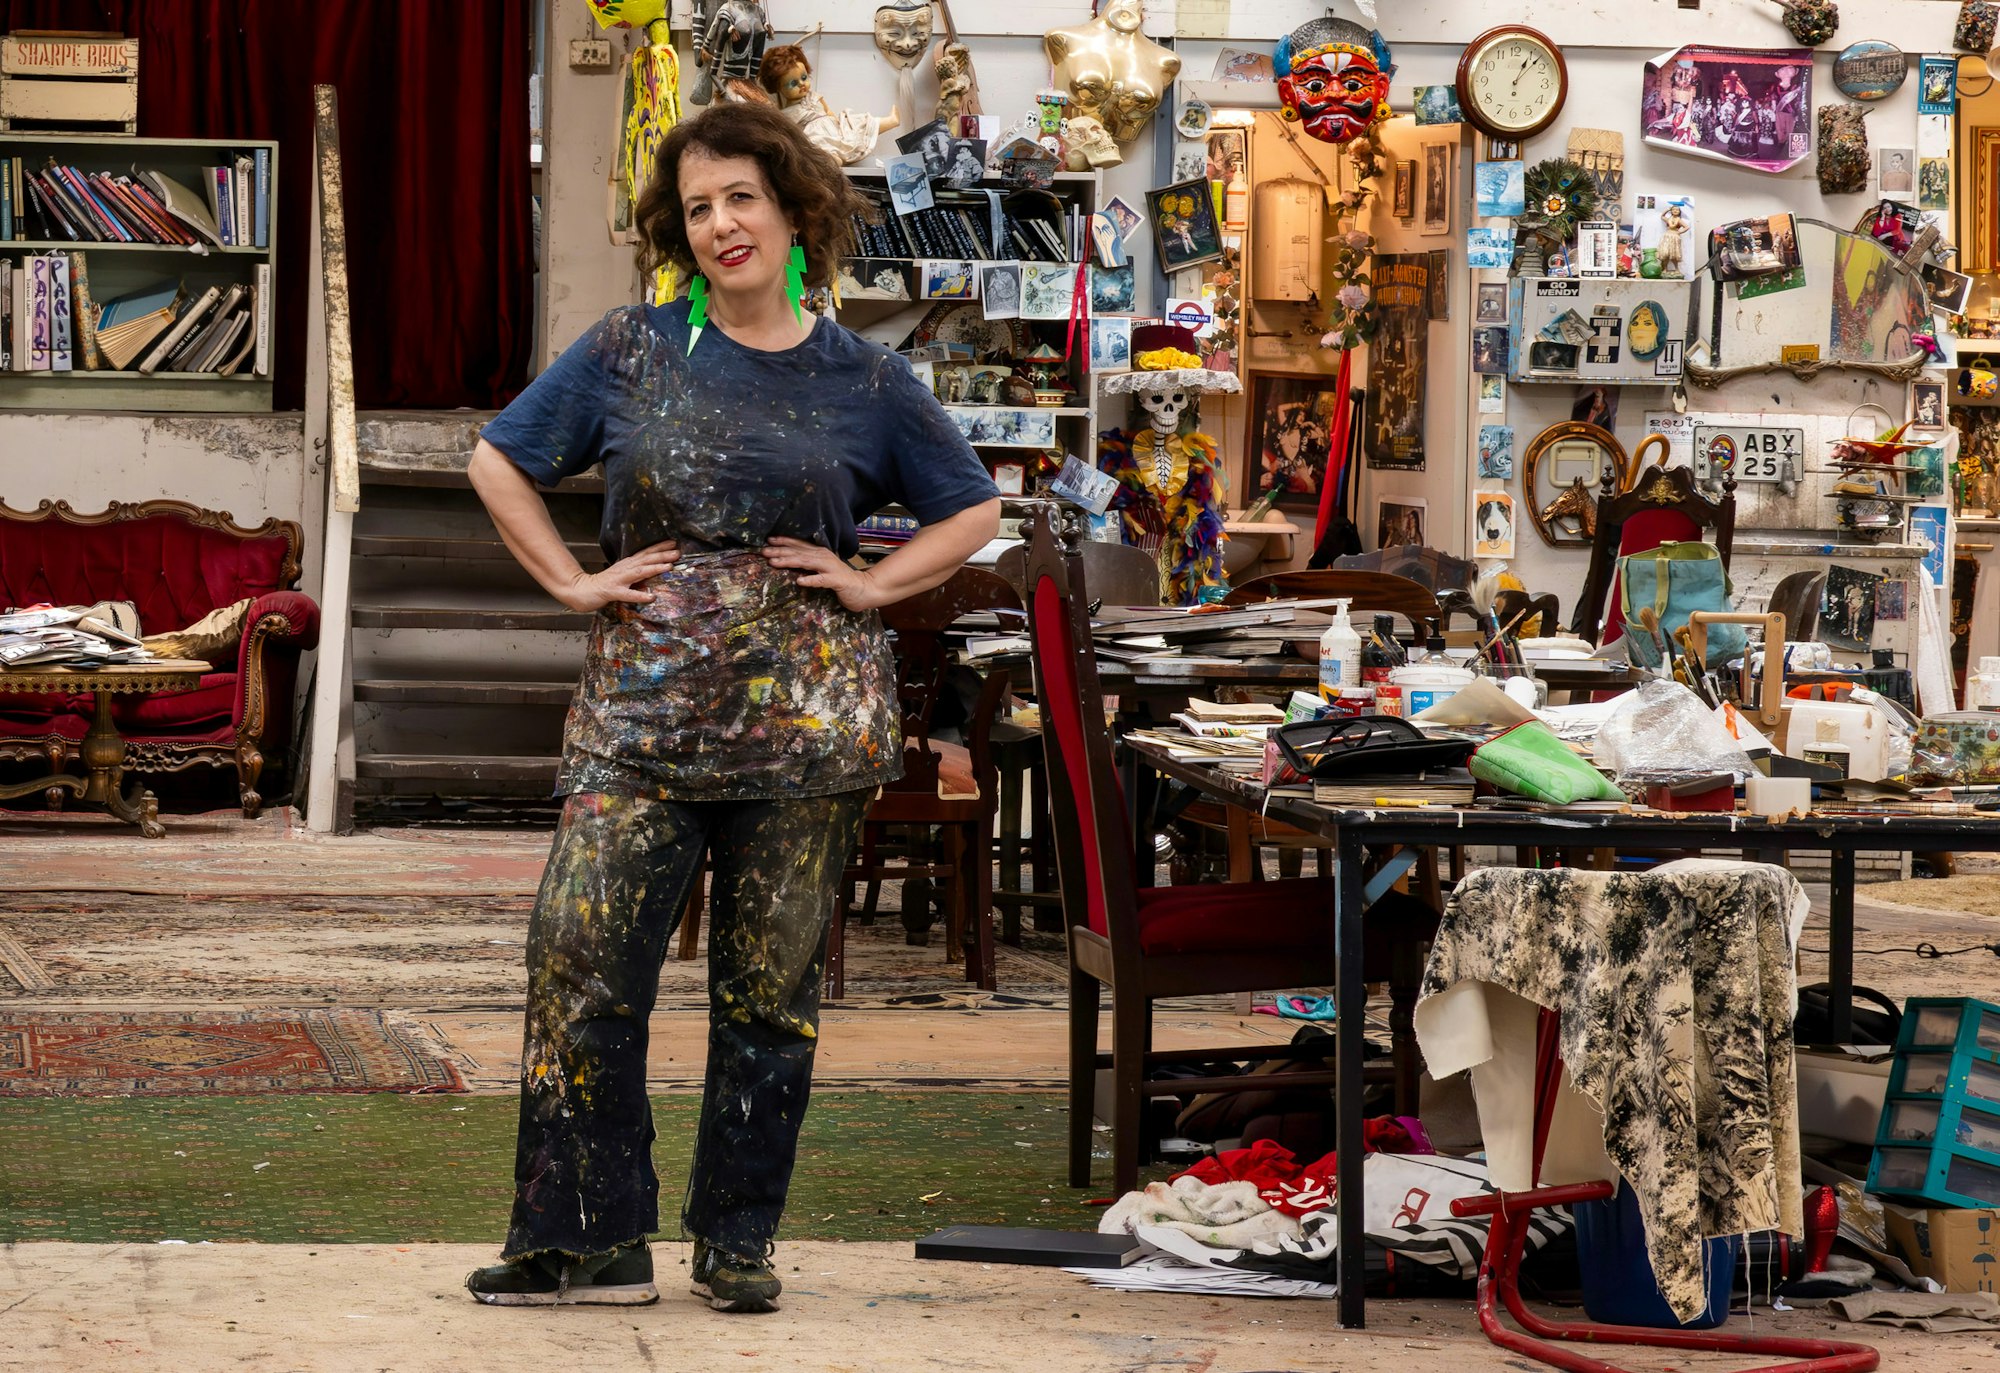 A person in paint-spattered clothes stands surrounded by many art-related objects